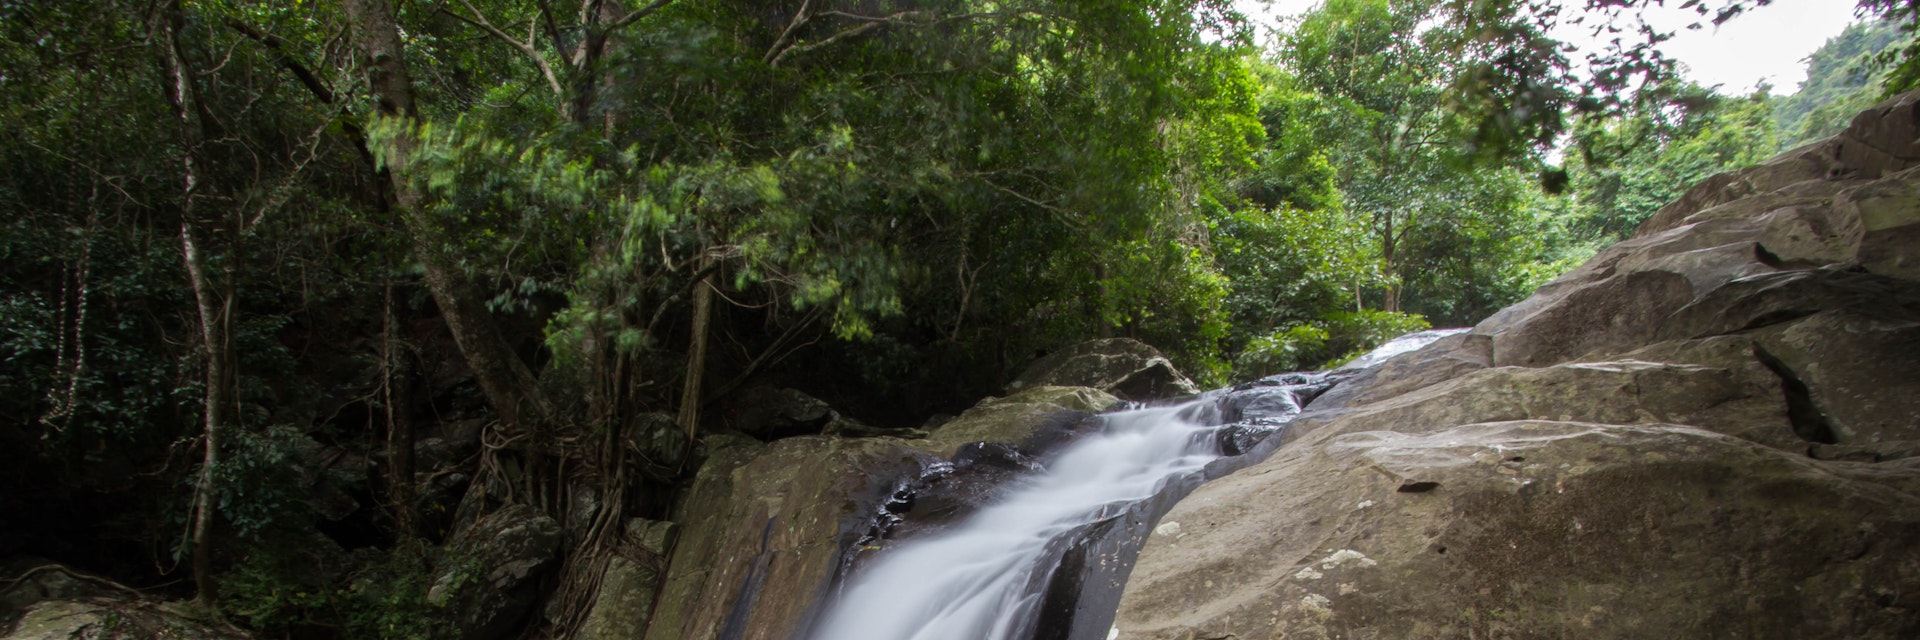 Pa La-U waterfall is located in the verdant forest area of Kaeng Krachan National Park.